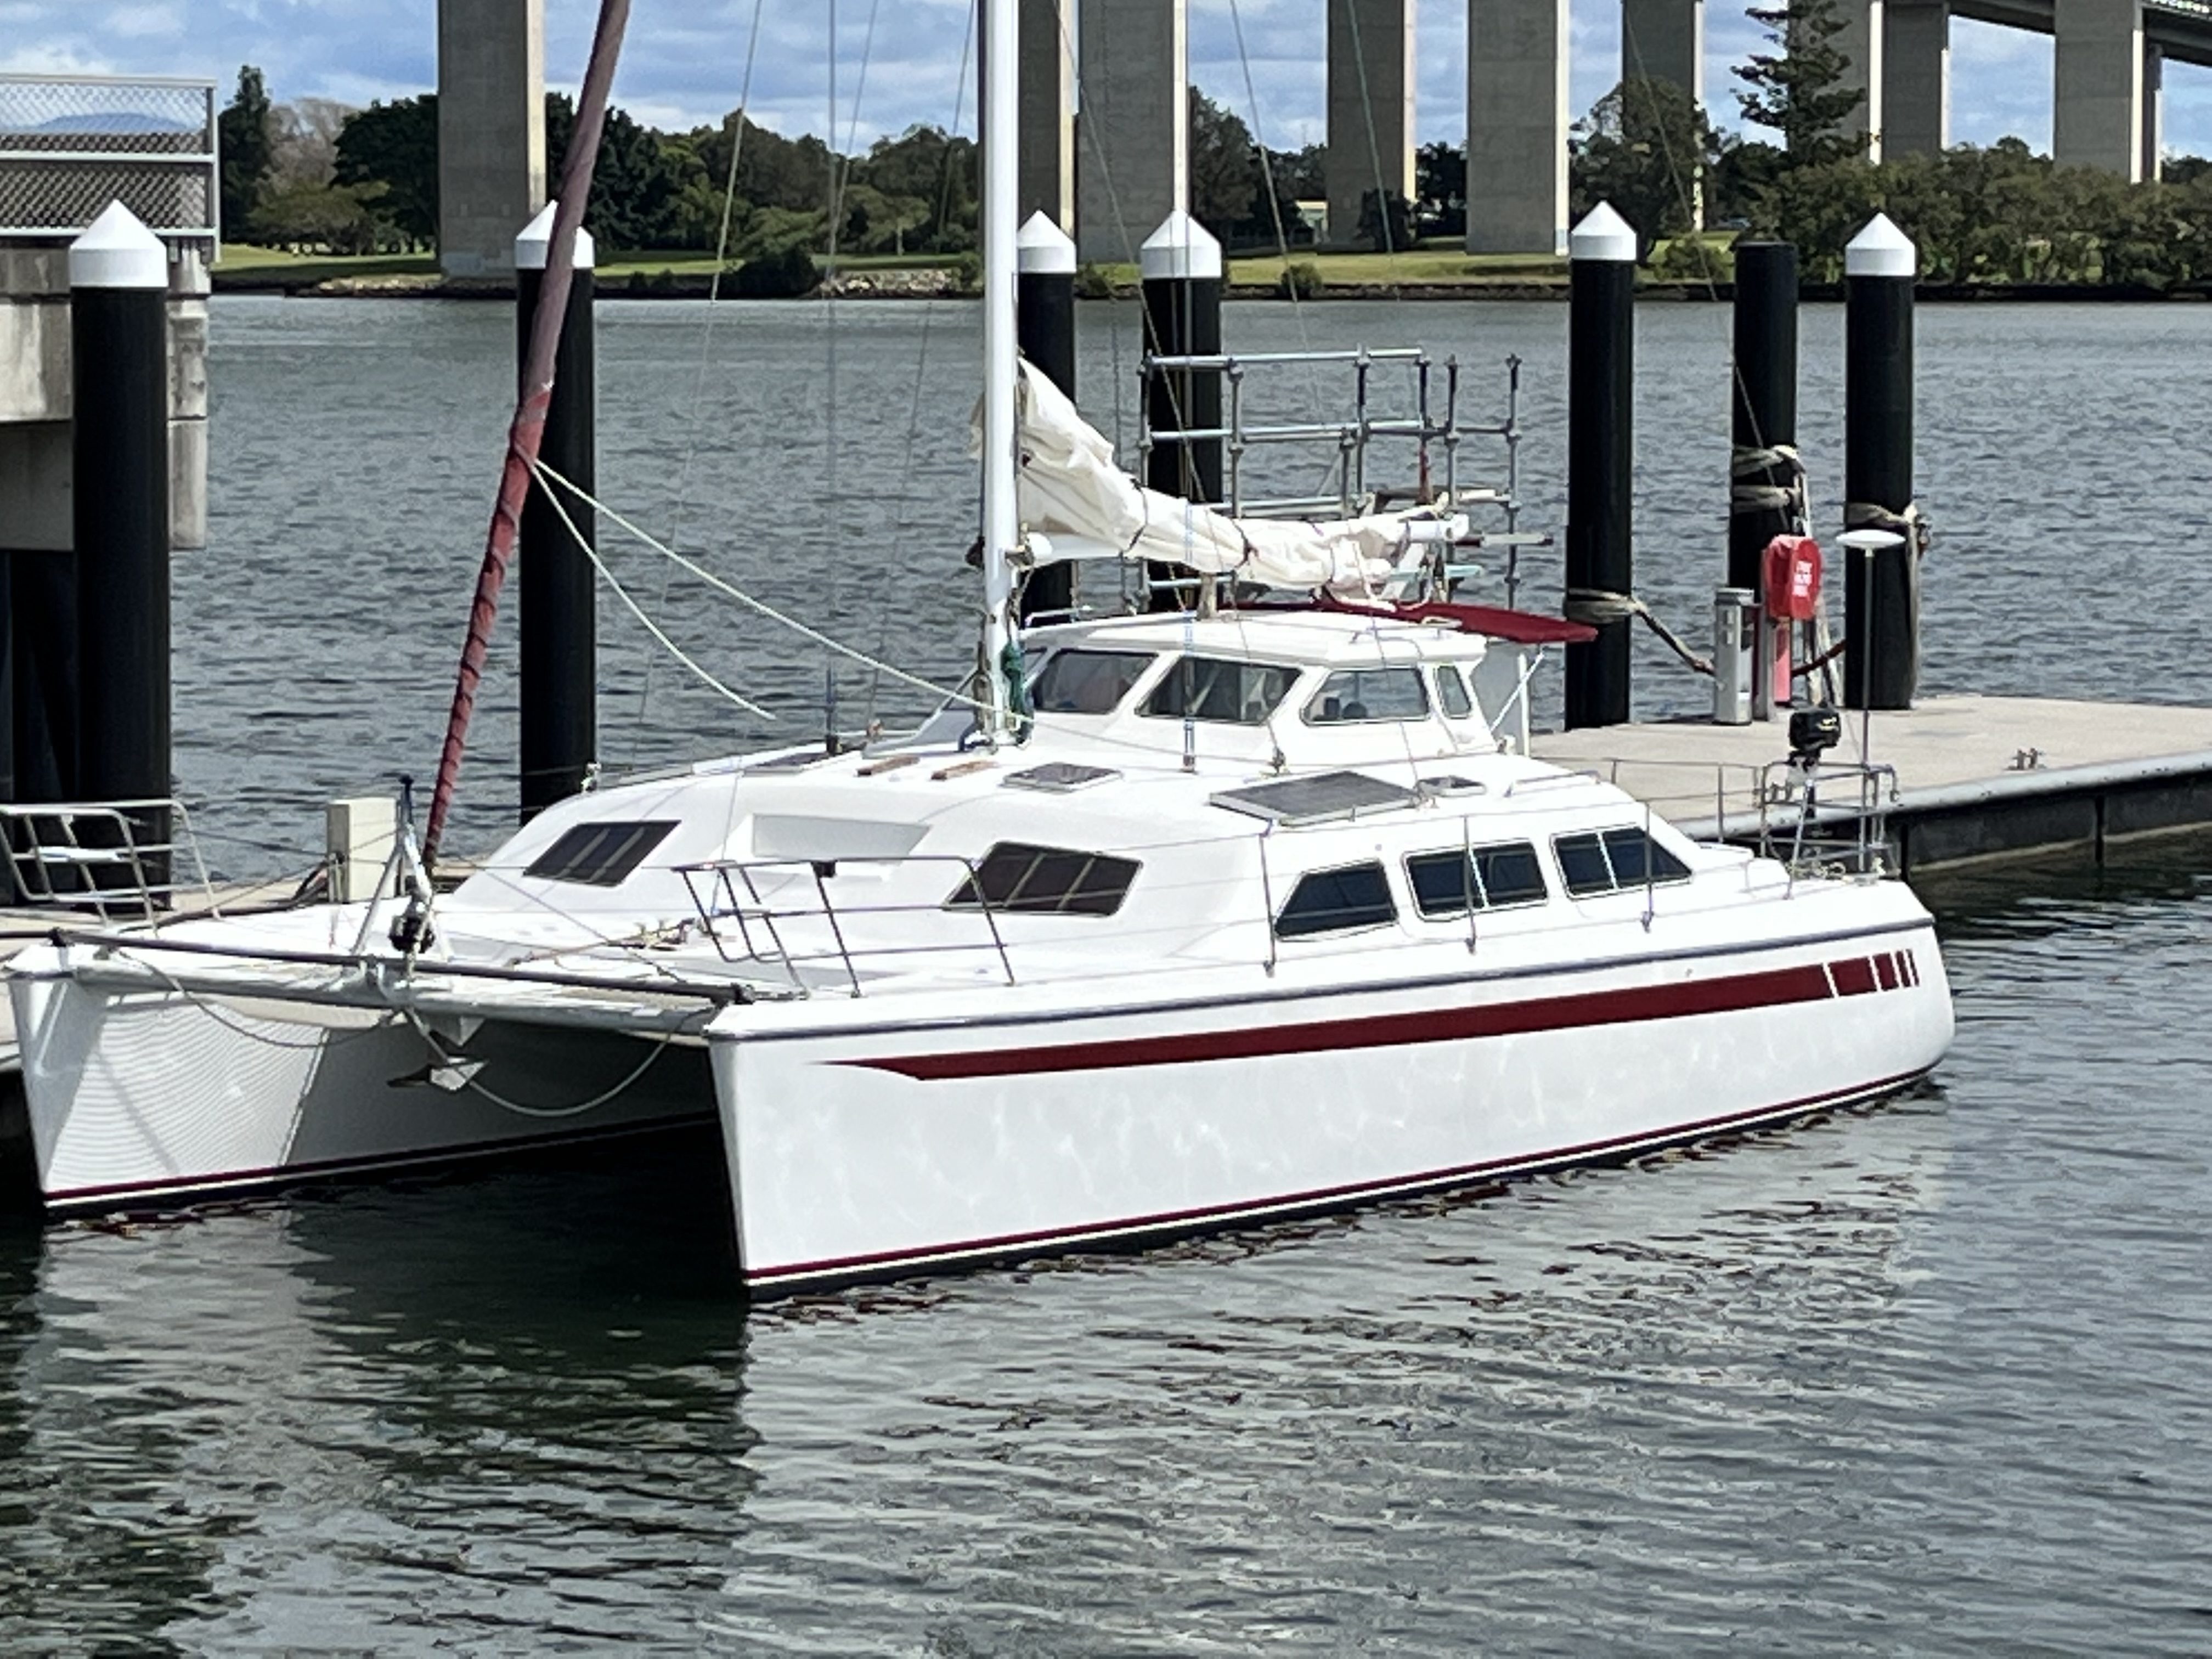 Simpson Inspiration 10 Catamaran - Inspection Highly Recommended